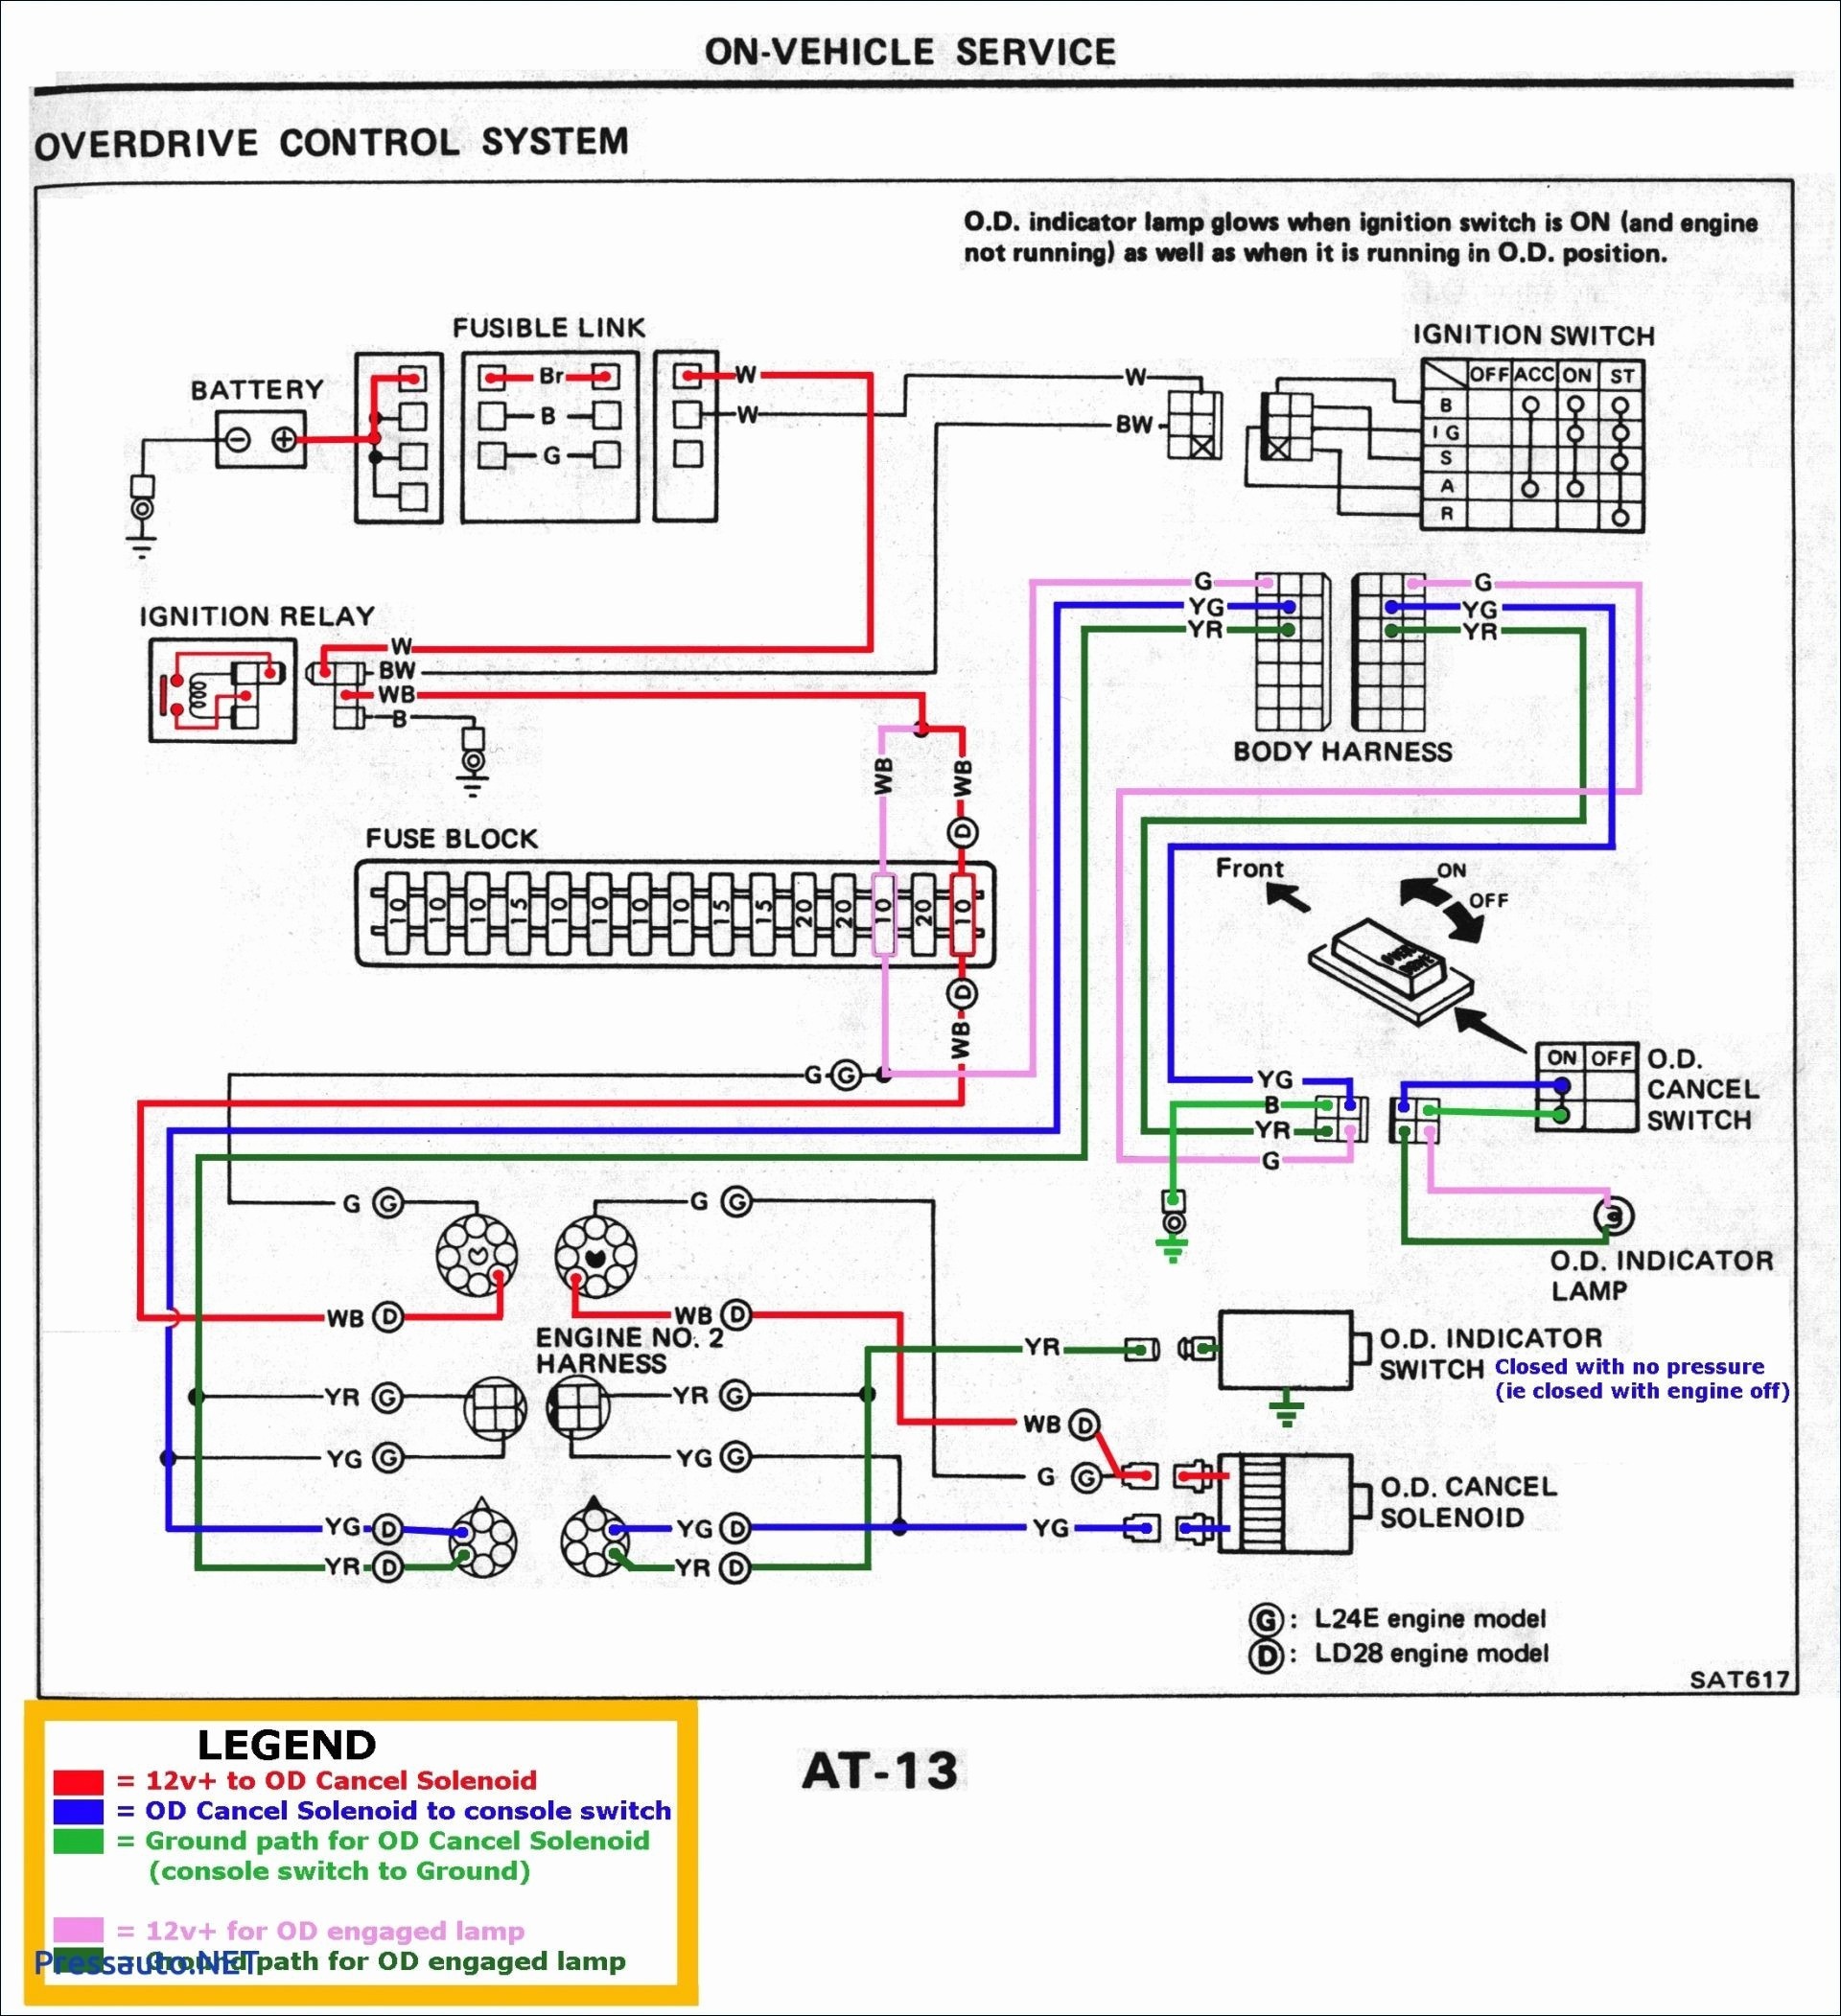 Wiring Diagram Quadcopter 2019 Wiring Diagrams for Quadcopters New Wiring Diagram Wiring Diagram